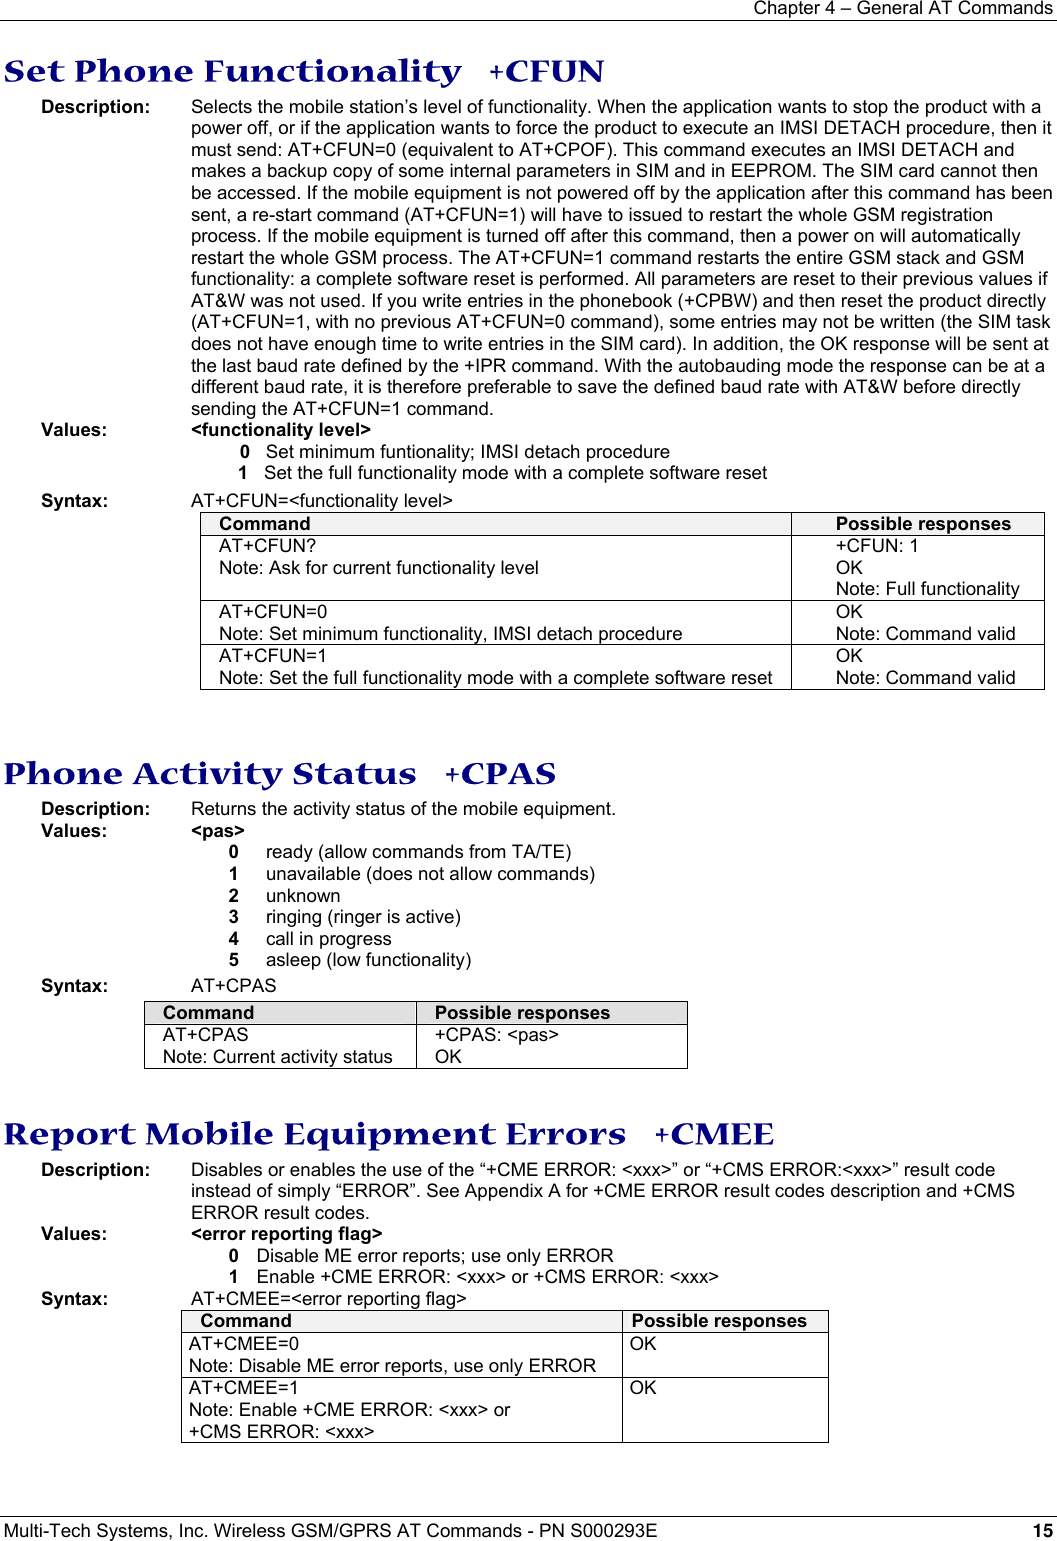 Chapter 4 – General AT Commands Multi-Tech Systems, Inc. Wireless GSM/GPRS AT Commands - PN S000293E 15  Set Phone Functionality   +CFUN Description:  Selects the mobile station’s level of functionality. When the application wants to stop the product with a power off, or if the application wants to force the product to execute an IMSI DETACH procedure, then it must send: AT+CFUN=0 (equivalent to AT+CPOF). This command executes an IMSI DETACH and makes a backup copy of some internal parameters in SIM and in EEPROM. The SIM card cannot then be accessed. If the mobile equipment is not powered off by the application after this command has been sent, a re-start command (AT+CFUN=1) will have to issued to restart the whole GSM registration process. If the mobile equipment is turned off after this command, then a power on will automatically restart the whole GSM process. The AT+CFUN=1 command restarts the entire GSM stack and GSM functionality: a complete software reset is performed. All parameters are reset to their previous values if AT&amp;W was not used. If you write entries in the phonebook (+CPBW) and then reset the product directly (AT+CFUN=1, with no previous AT+CFUN=0 command), some entries may not be written (the SIM task does not have enough time to write entries in the SIM card). In addition, the OK response will be sent at the last baud rate defined by the +IPR command. With the autobauding mode the response can be at a different baud rate, it is therefore preferable to save the defined baud rate with AT&amp;W before directly sending the AT+CFUN=1 command.  Values: &lt;functionality level&gt;   0   Set minimum funtionality; IMSI detach procedure   1   Set the full functionality mode with a complete software reset Syntax: AT+CFUN=&lt;functionality level&gt; Command  Possible responses AT+CFUN? Note: Ask for current functionality level +CFUN: 1 OK Note: Full functionality AT+CFUN=0 Note: Set minimum functionality, IMSI detach procedure OK Note: Command valid AT+CFUN=1 Note: Set the full functionality mode with a complete software reset OK Note: Command valid   Phone Activity Status   +CPAS Description:  Returns the activity status of the mobile equipment. Values: &lt;pas&gt;  0  ready (allow commands from TA/TE)  1  unavailable (does not allow commands)  2 unknown  3  ringing (ringer is active)  4 call in progress  5  asleep (low functionality) Syntax: AT+CPAS  Command  Possible responses AT+CPAS Note: Current activity status +CPAS: &lt;pas&gt; OK   Report Mobile Equipment Errors   +CMEE Description:  Disables or enables the use of the “+CME ERROR: &lt;xxx&gt;” or “+CMS ERROR:&lt;xxx&gt;” result code instead of simply “ERROR”. See Appendix A for +CME ERROR result codes description and +CMS ERROR result codes. Values: &lt;error reporting flag&gt;  0  Disable ME error reports; use only ERROR  1  Enable +CME ERROR: &lt;xxx&gt; or +CMS ERROR: &lt;xxx&gt;     Syntax:  AT+CMEE=&lt;error reporting flag&gt;   Command  Possible responses AT+CMEE=0 Note: Disable ME error reports, use only ERROR OK  AT+CMEE=1 Note: Enable +CME ERROR: &lt;xxx&gt; or +CMS ERROR: &lt;xxx&gt; OK   